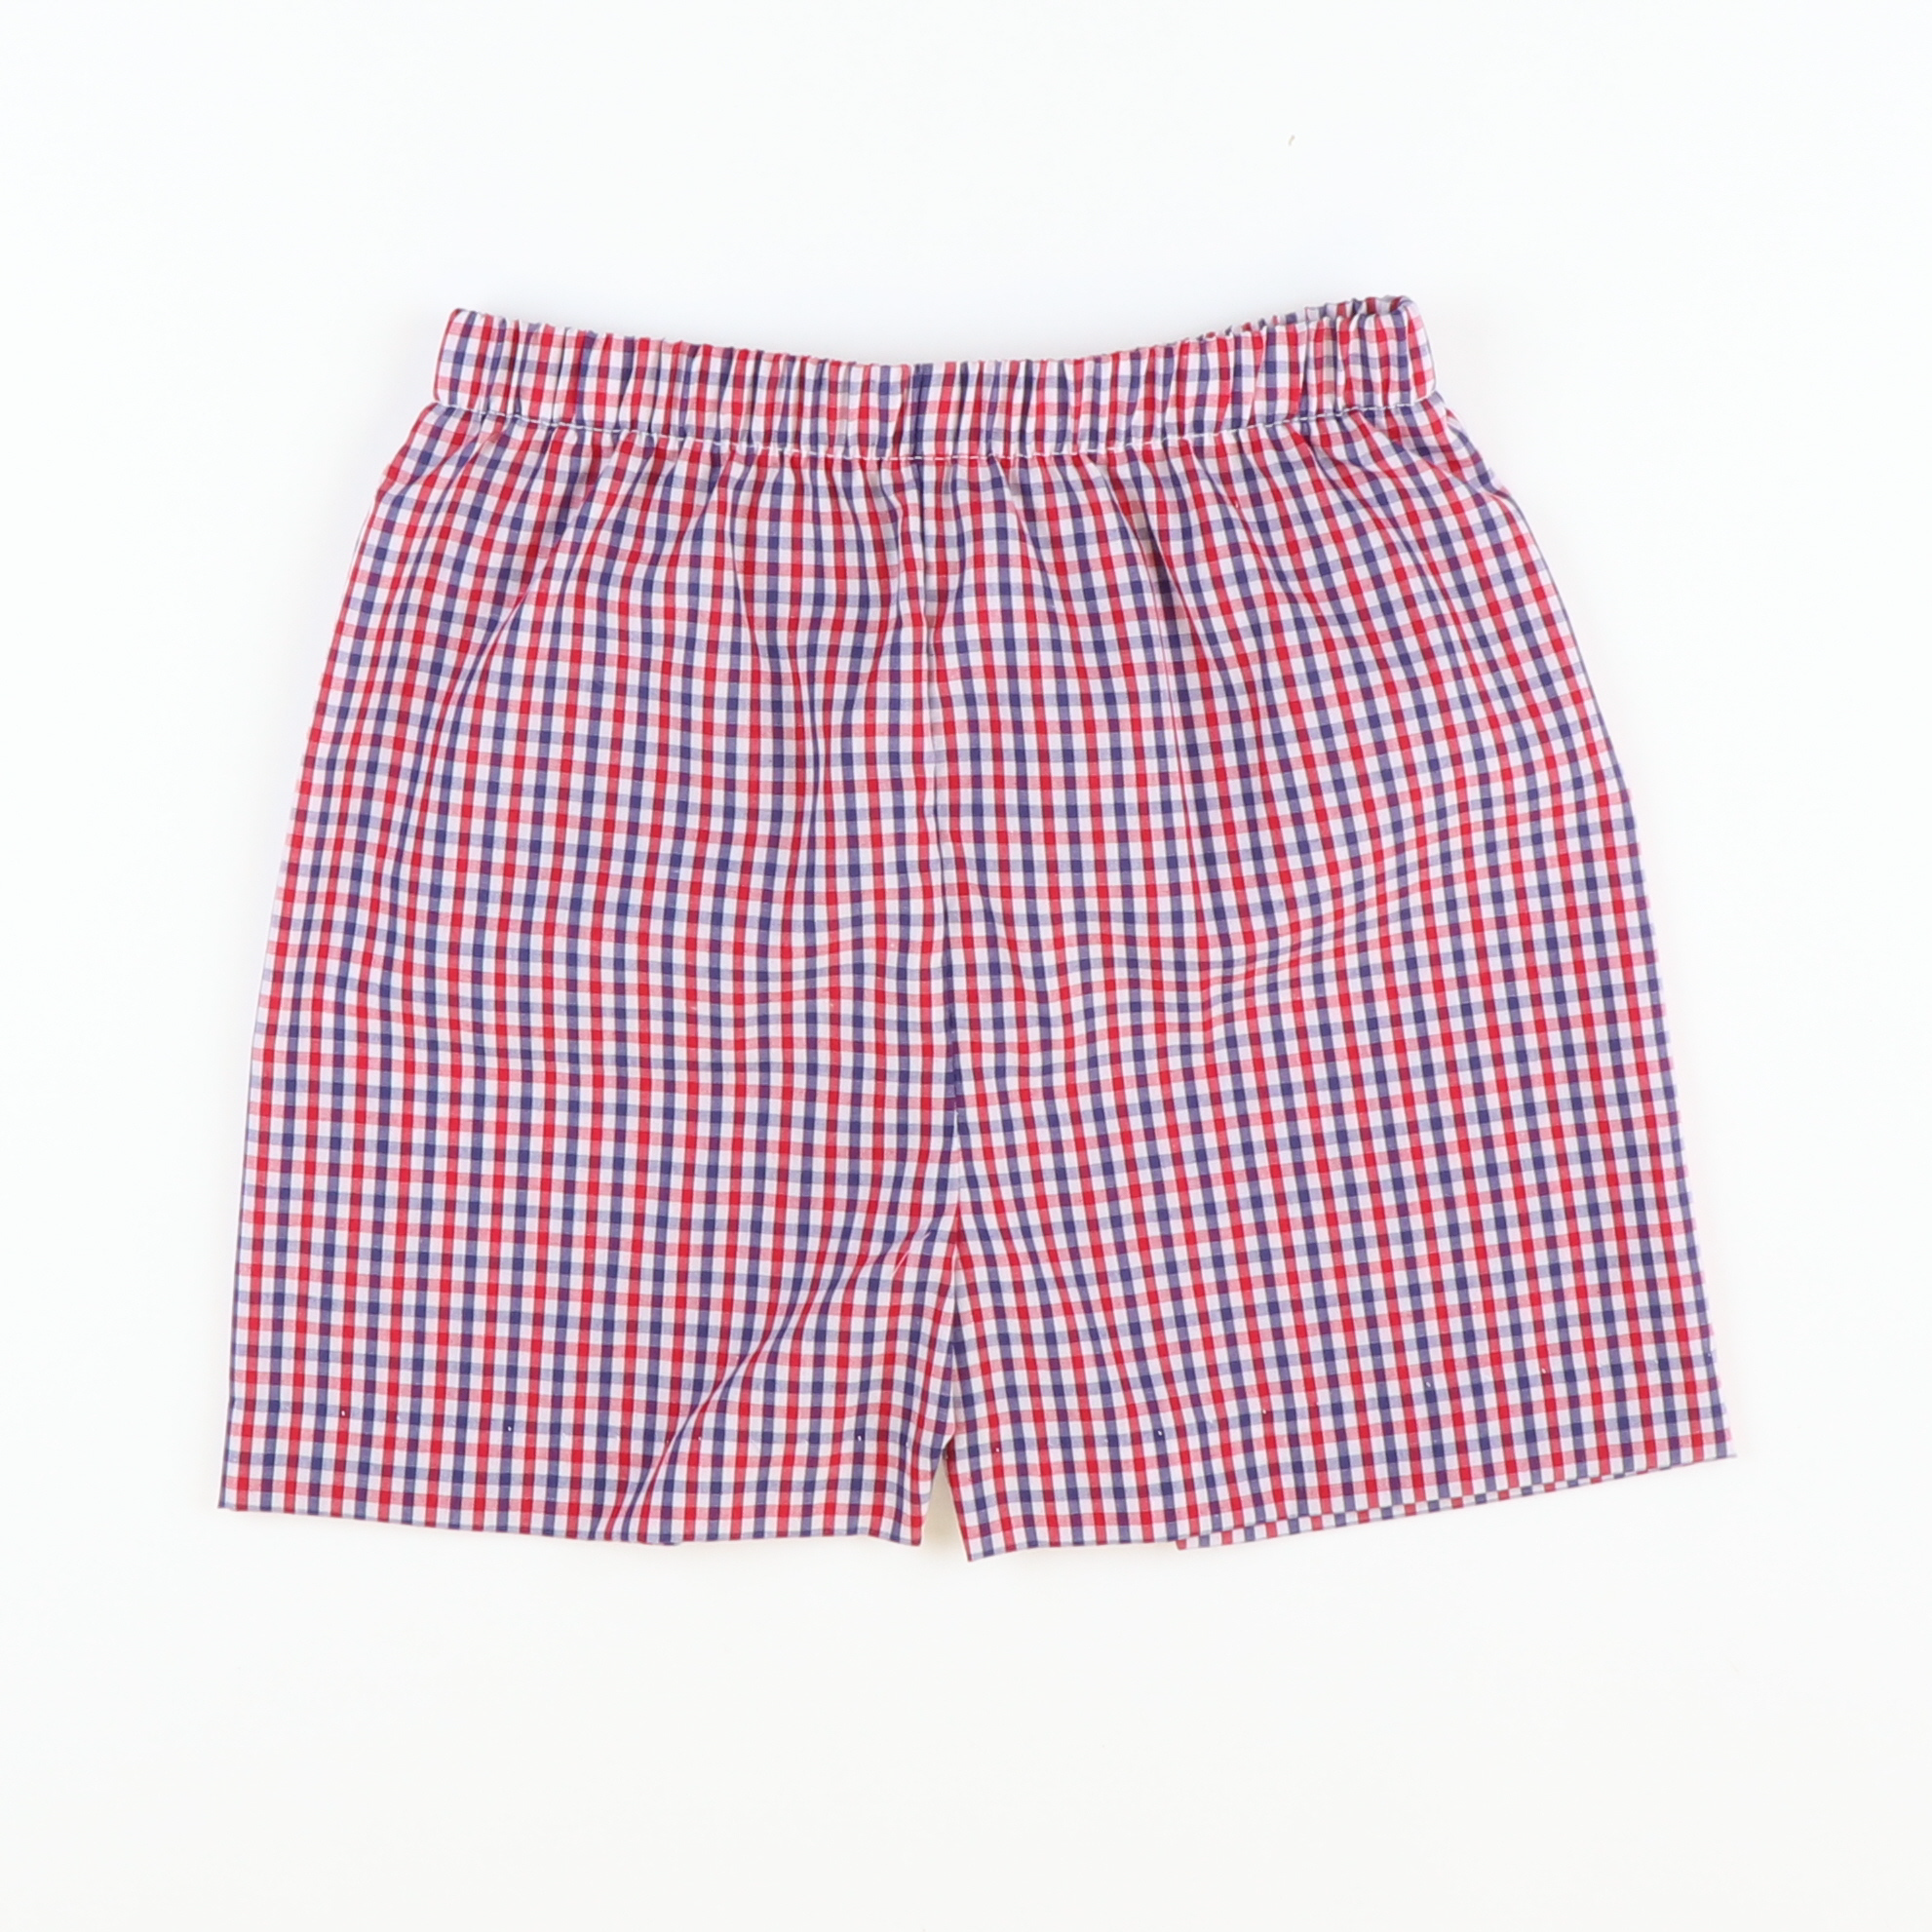 Signature Shorts - Red & Blue Plaid - Stellybelly